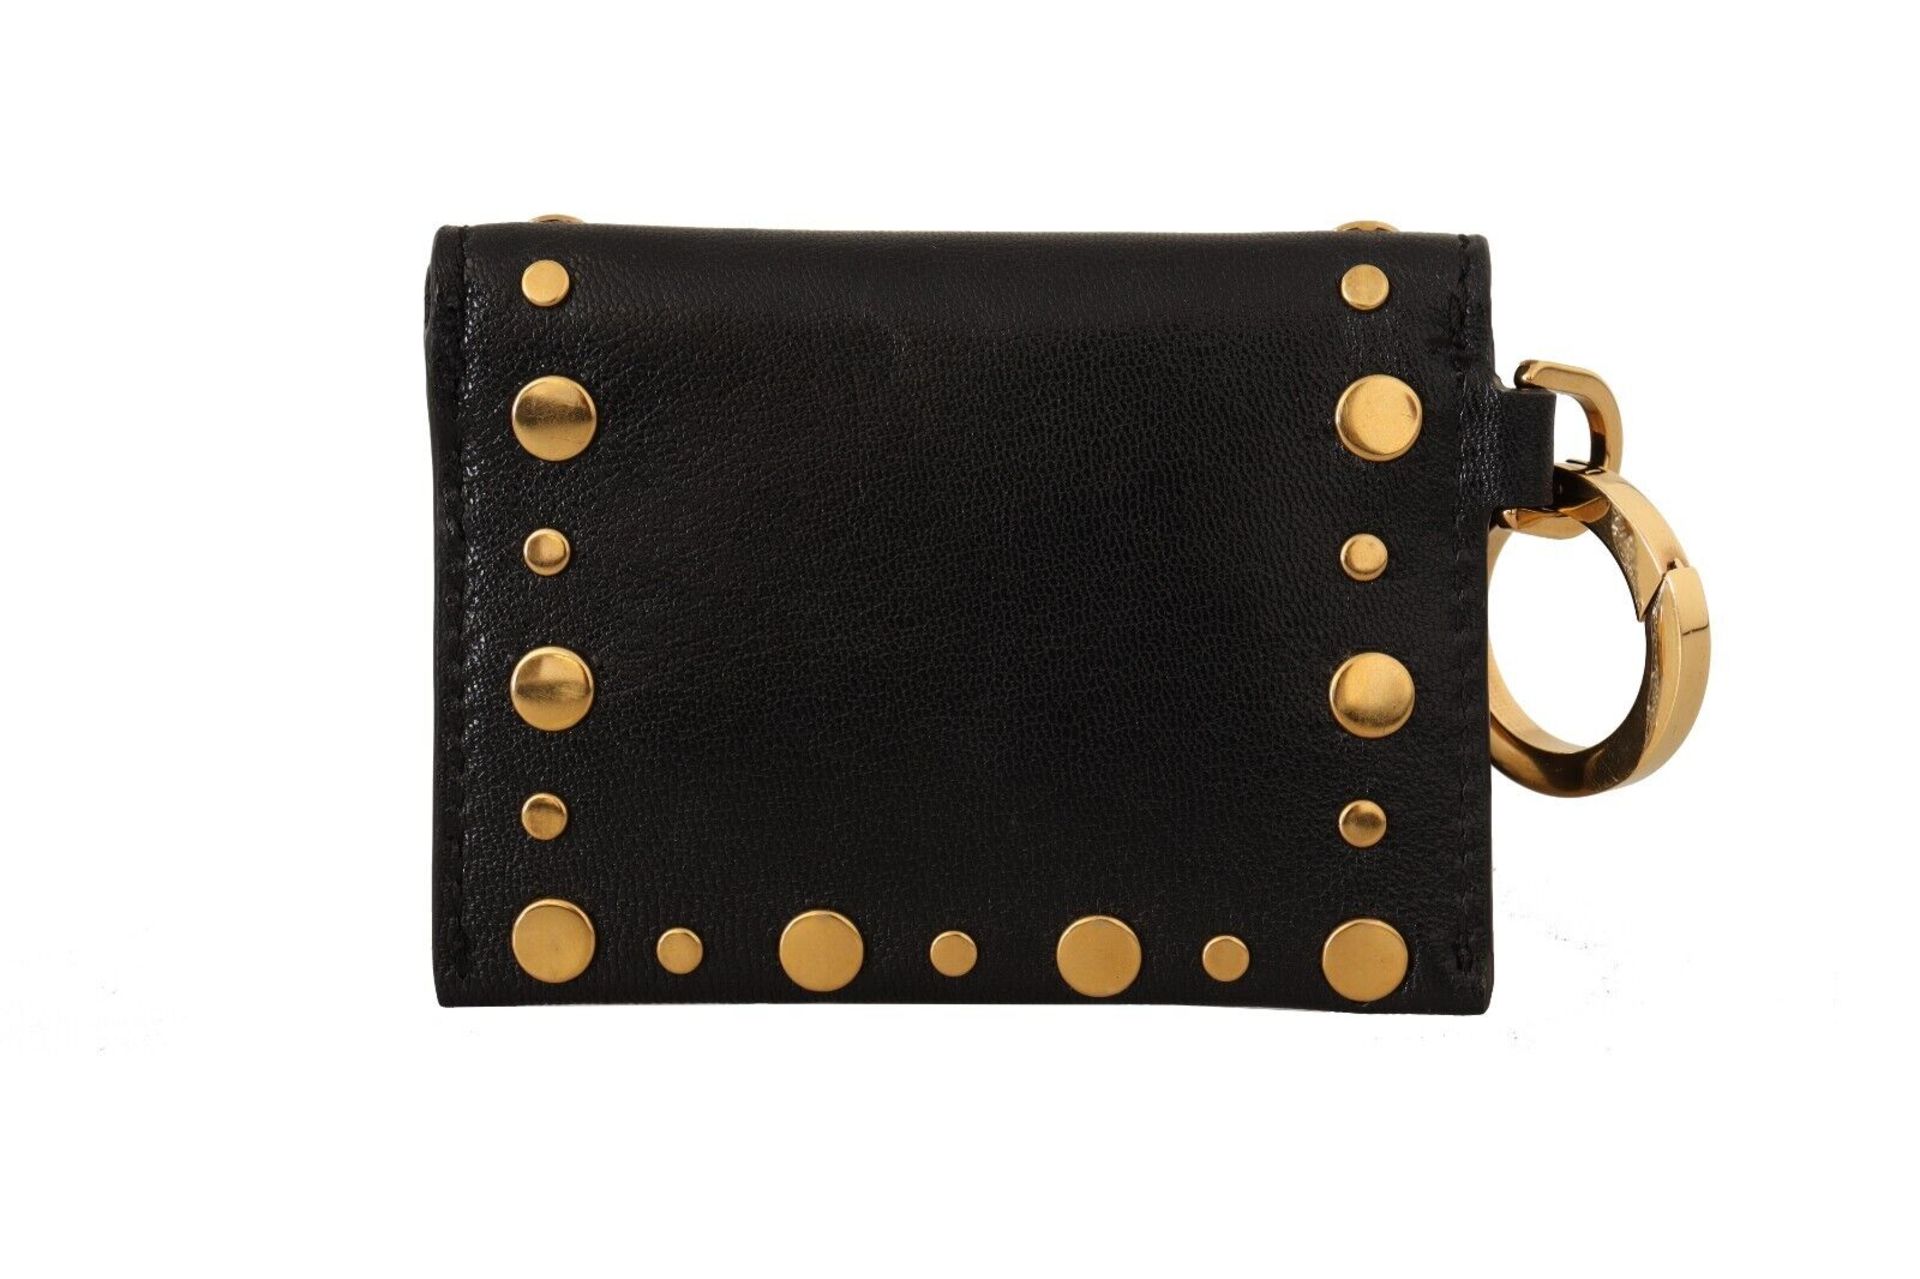 BLACK LEATHER MINI BIFOLD STUDDED KEYCHAIN WALLET - Image 6 of 9